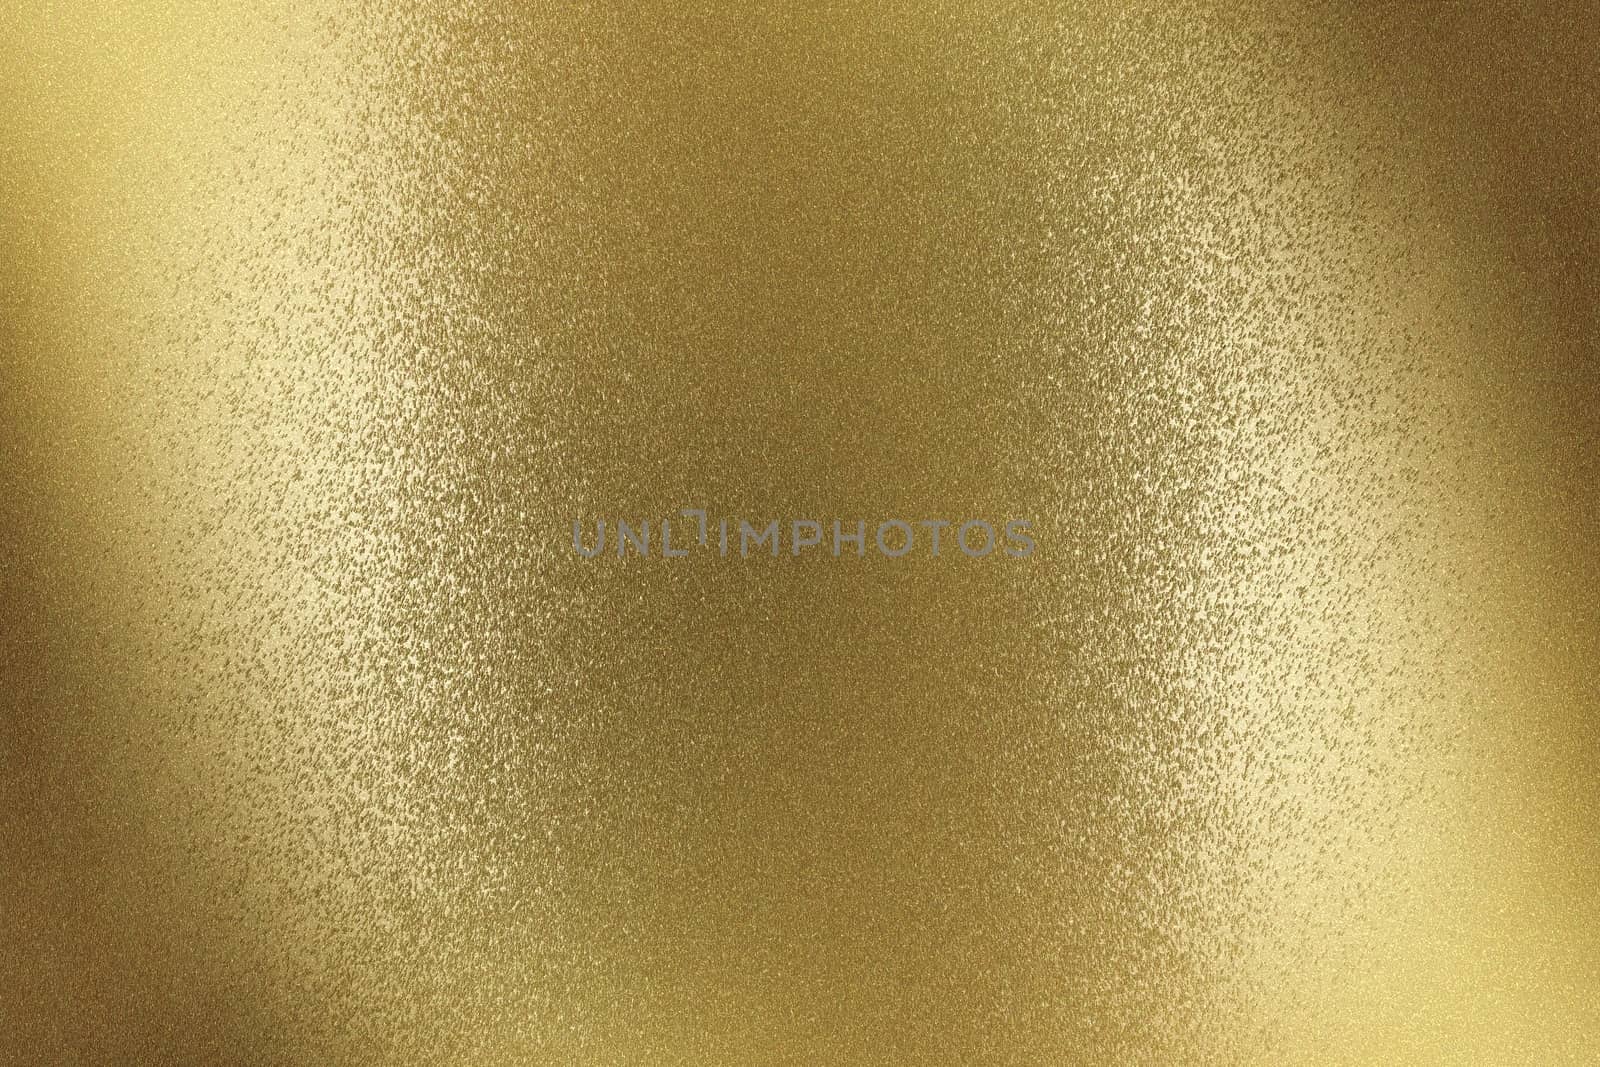 Glowing brushed bronze metal wall surface, abstract texture background